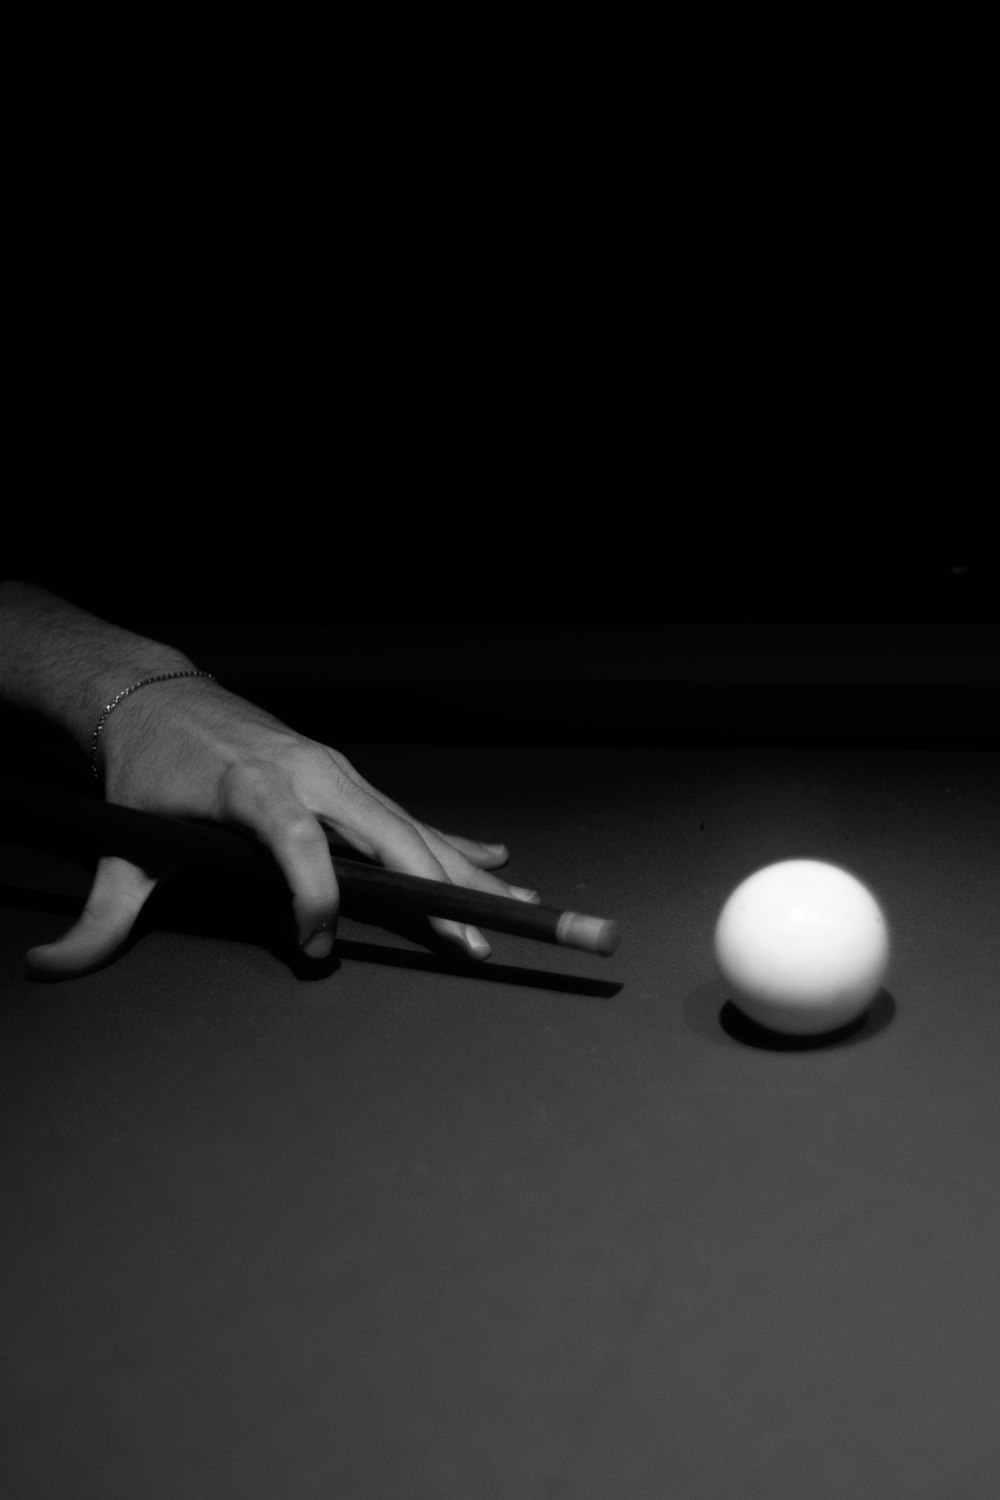 a person reaching for a ball on a table